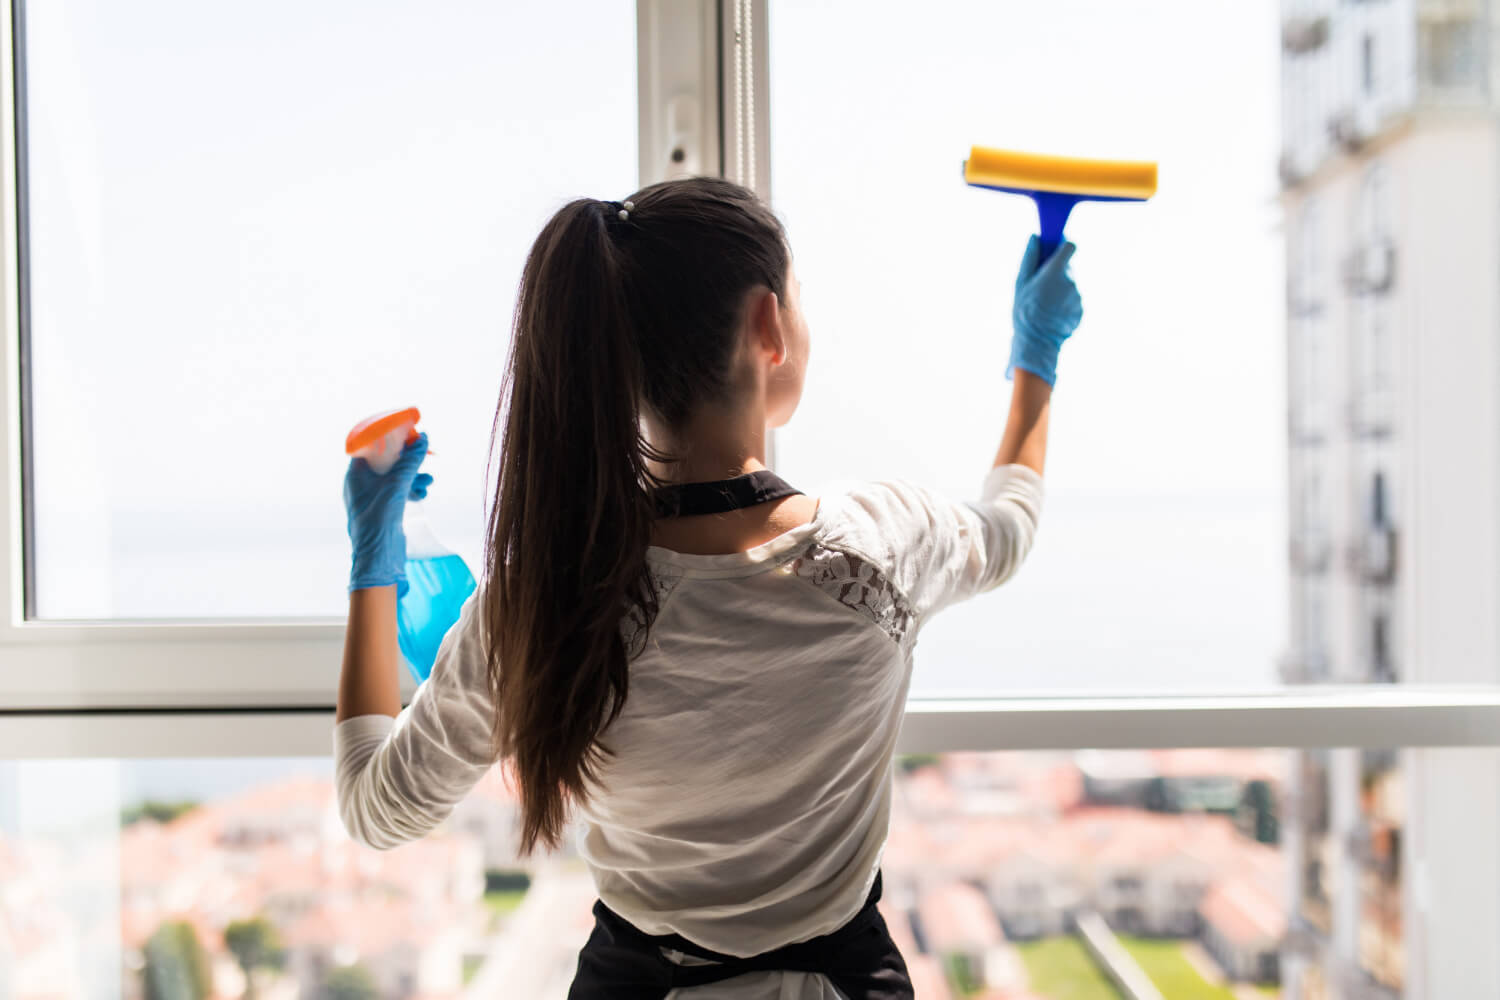 High-rise window cleaning